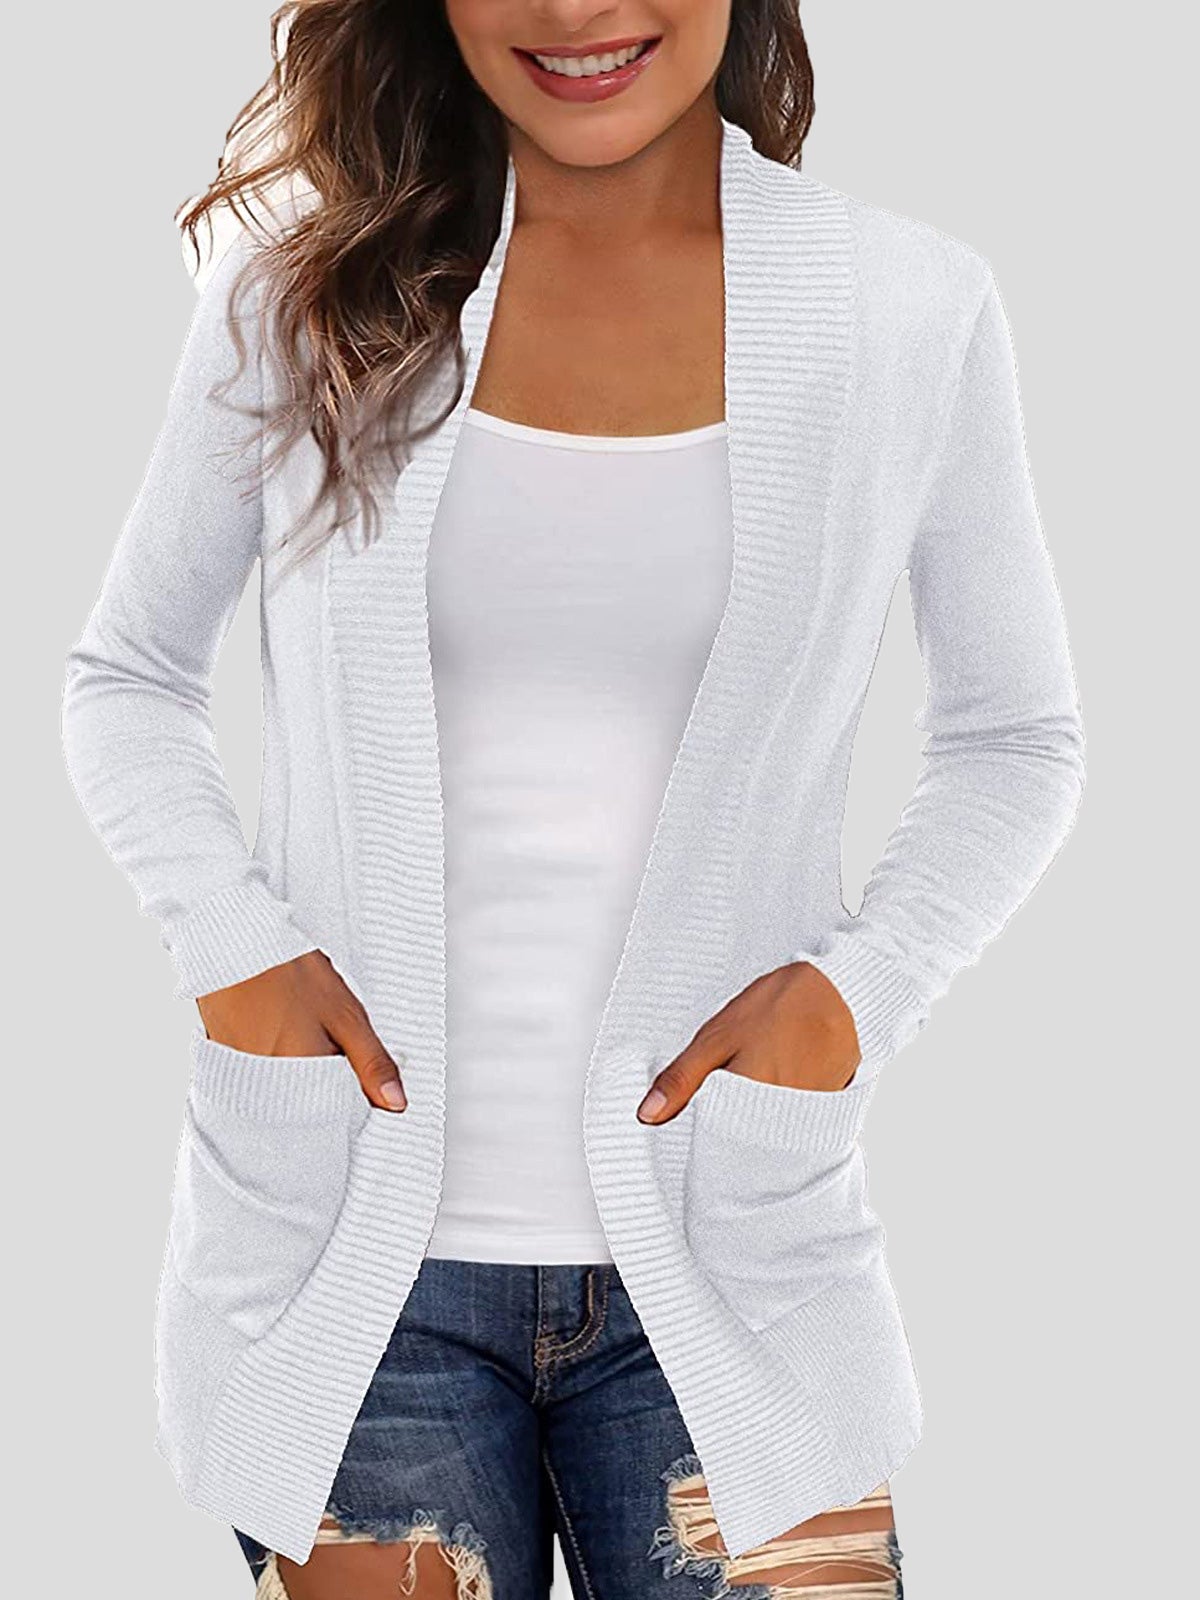 Solid Pocket Knitted Sweater Cardigan Shopvhs.com